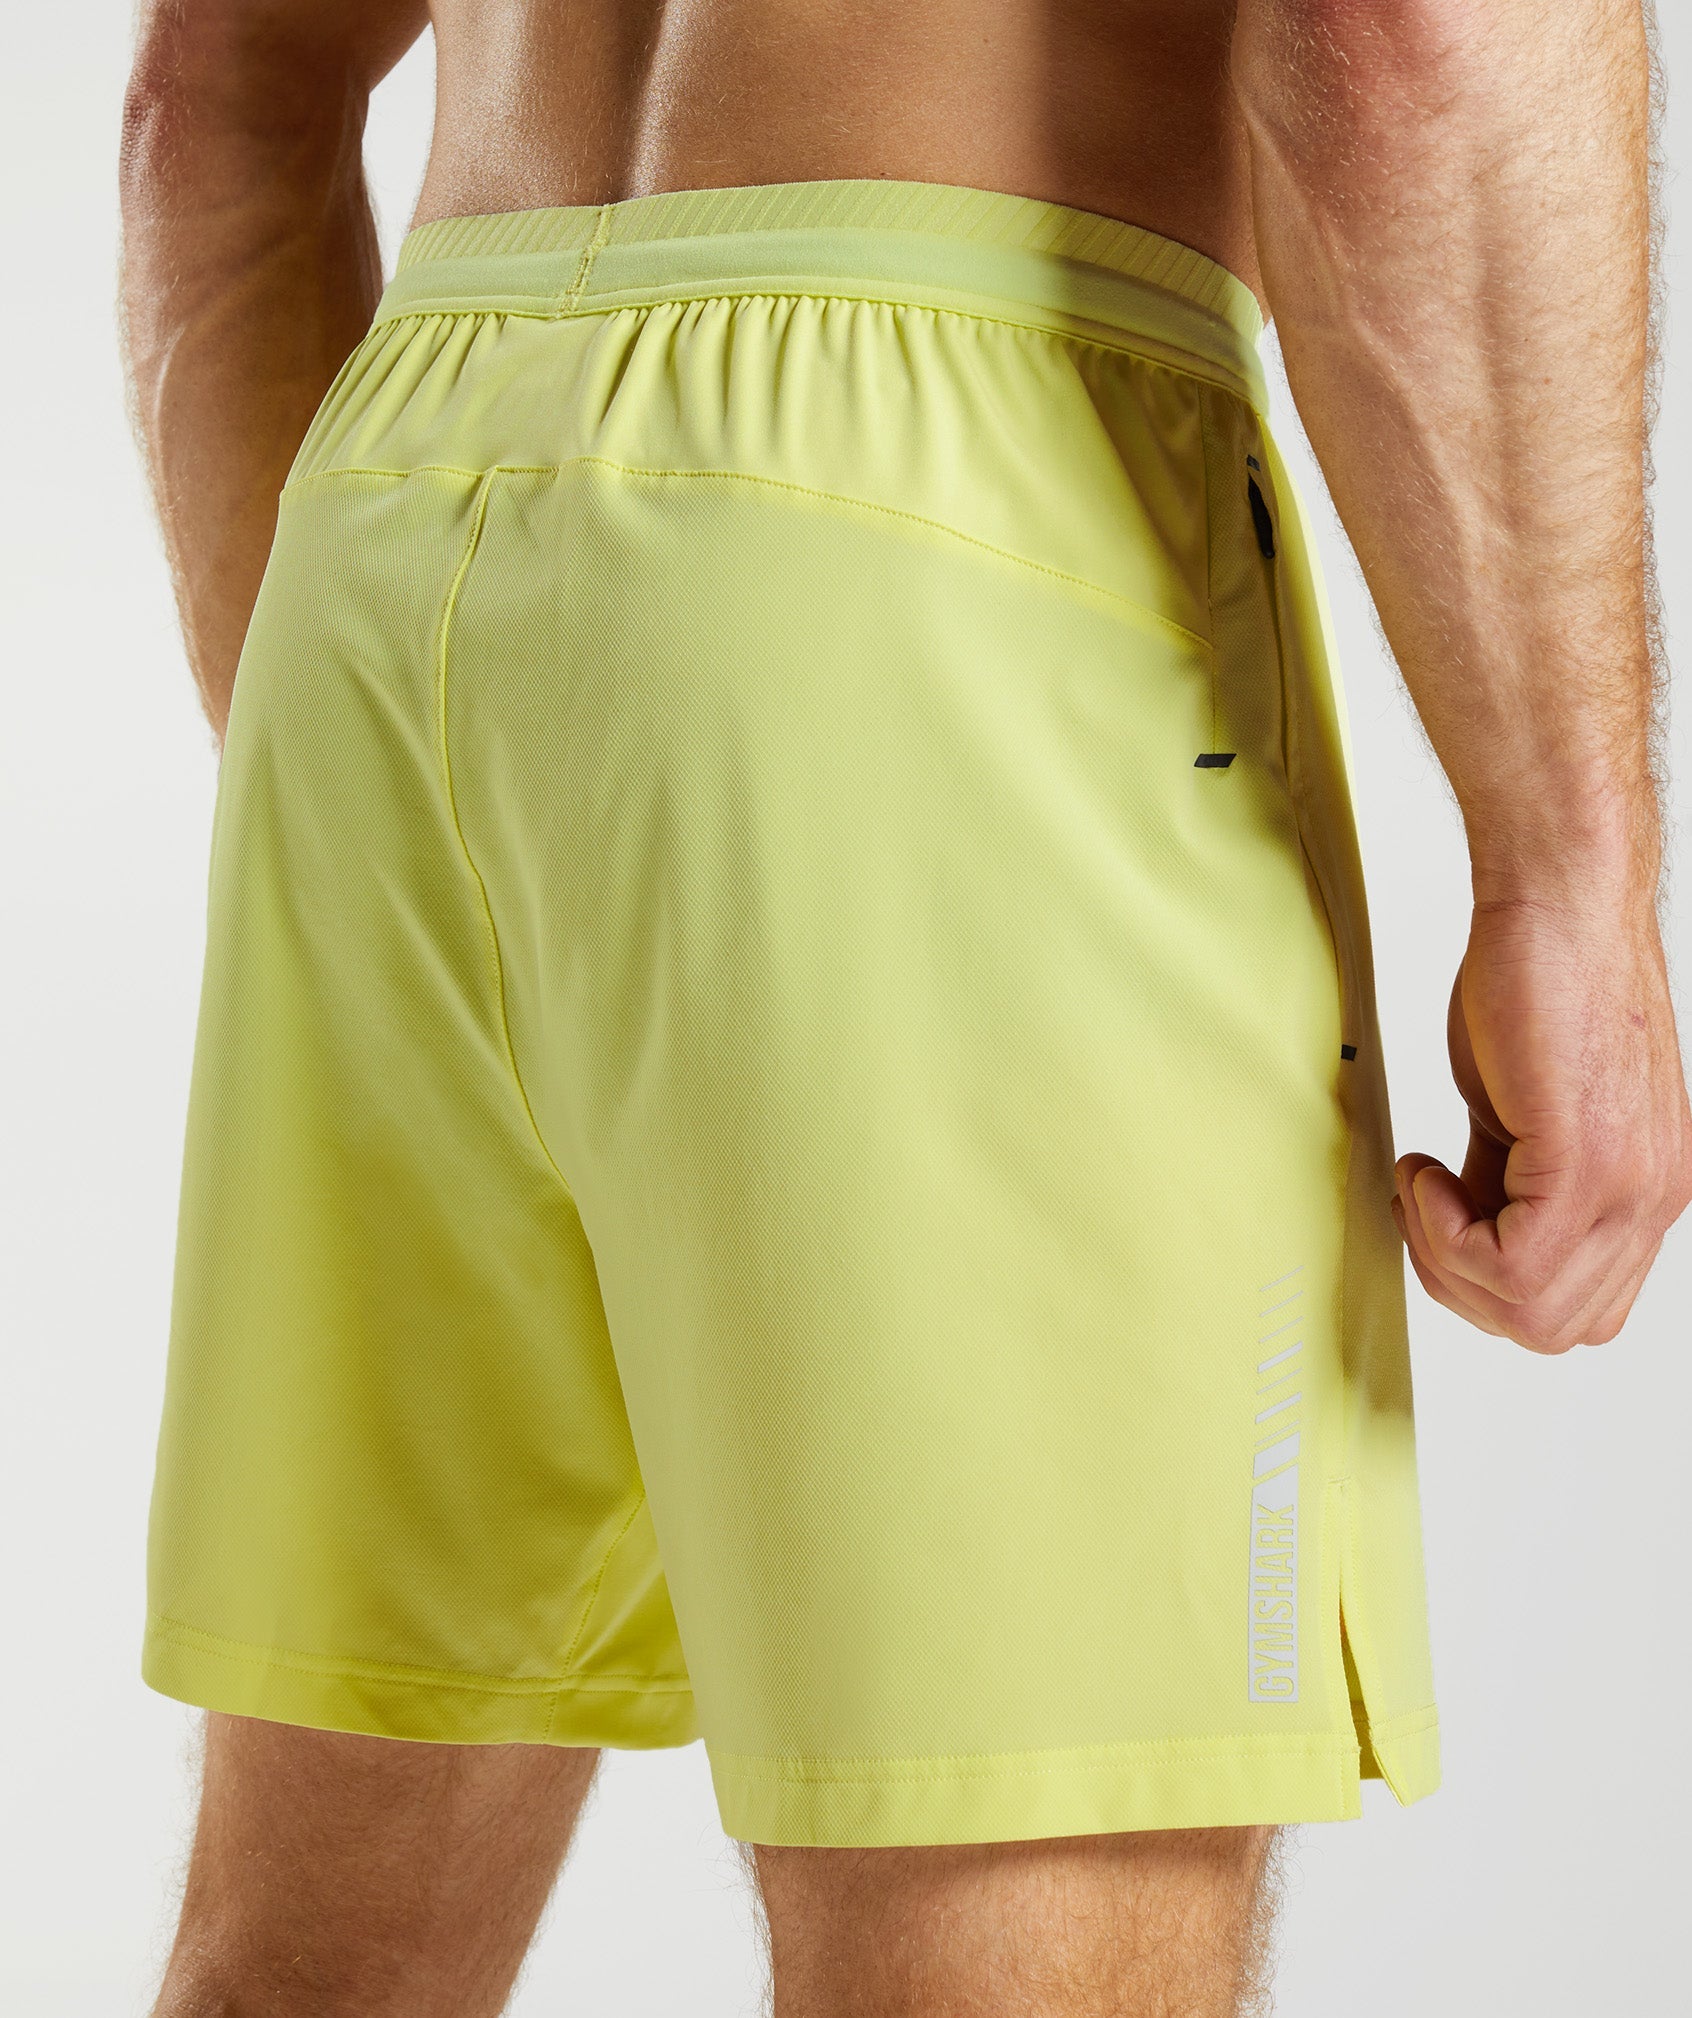 Apex 7" Hybrid Shorts in Firefly Green - view 5